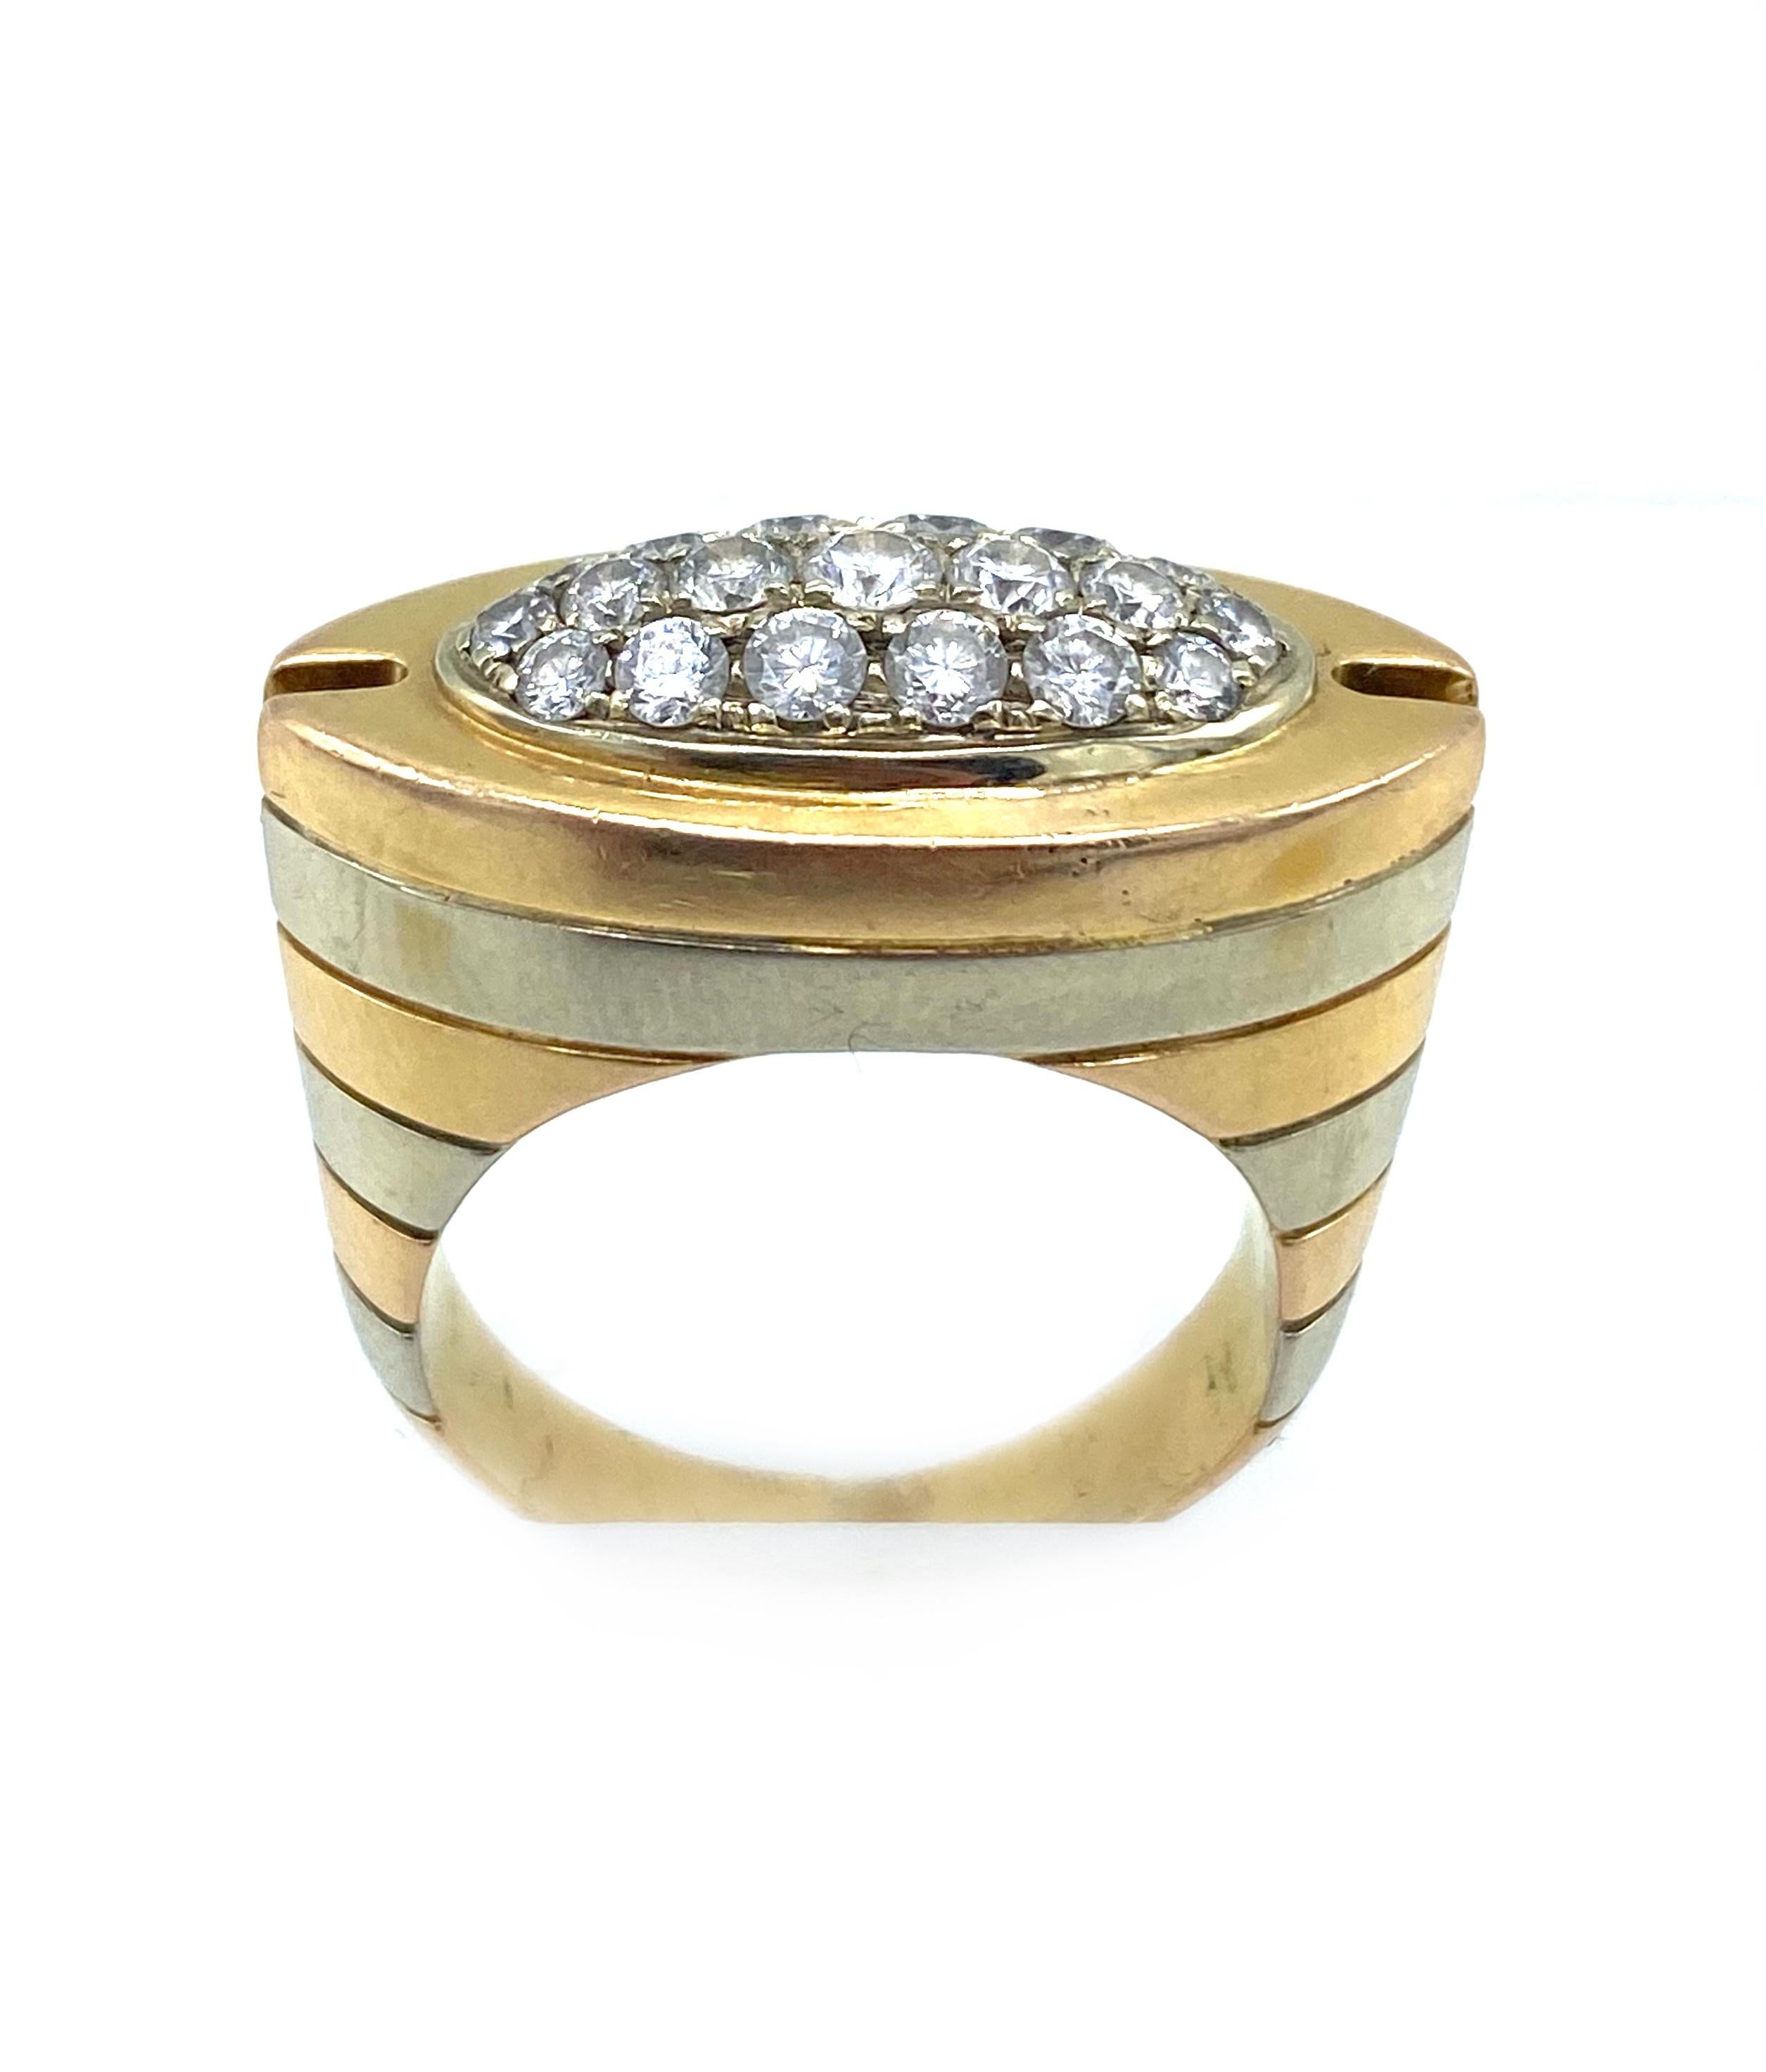 Product details:

The ring is made out of 18 karat white gold and rose gold with 1 ct of round brilliant cut diamonds F-G/ VVS, featuring striped pattern.

Total weight is 16.1 grams.
Measurements: 1inch long and 0.5 inch wide.
Ring size is